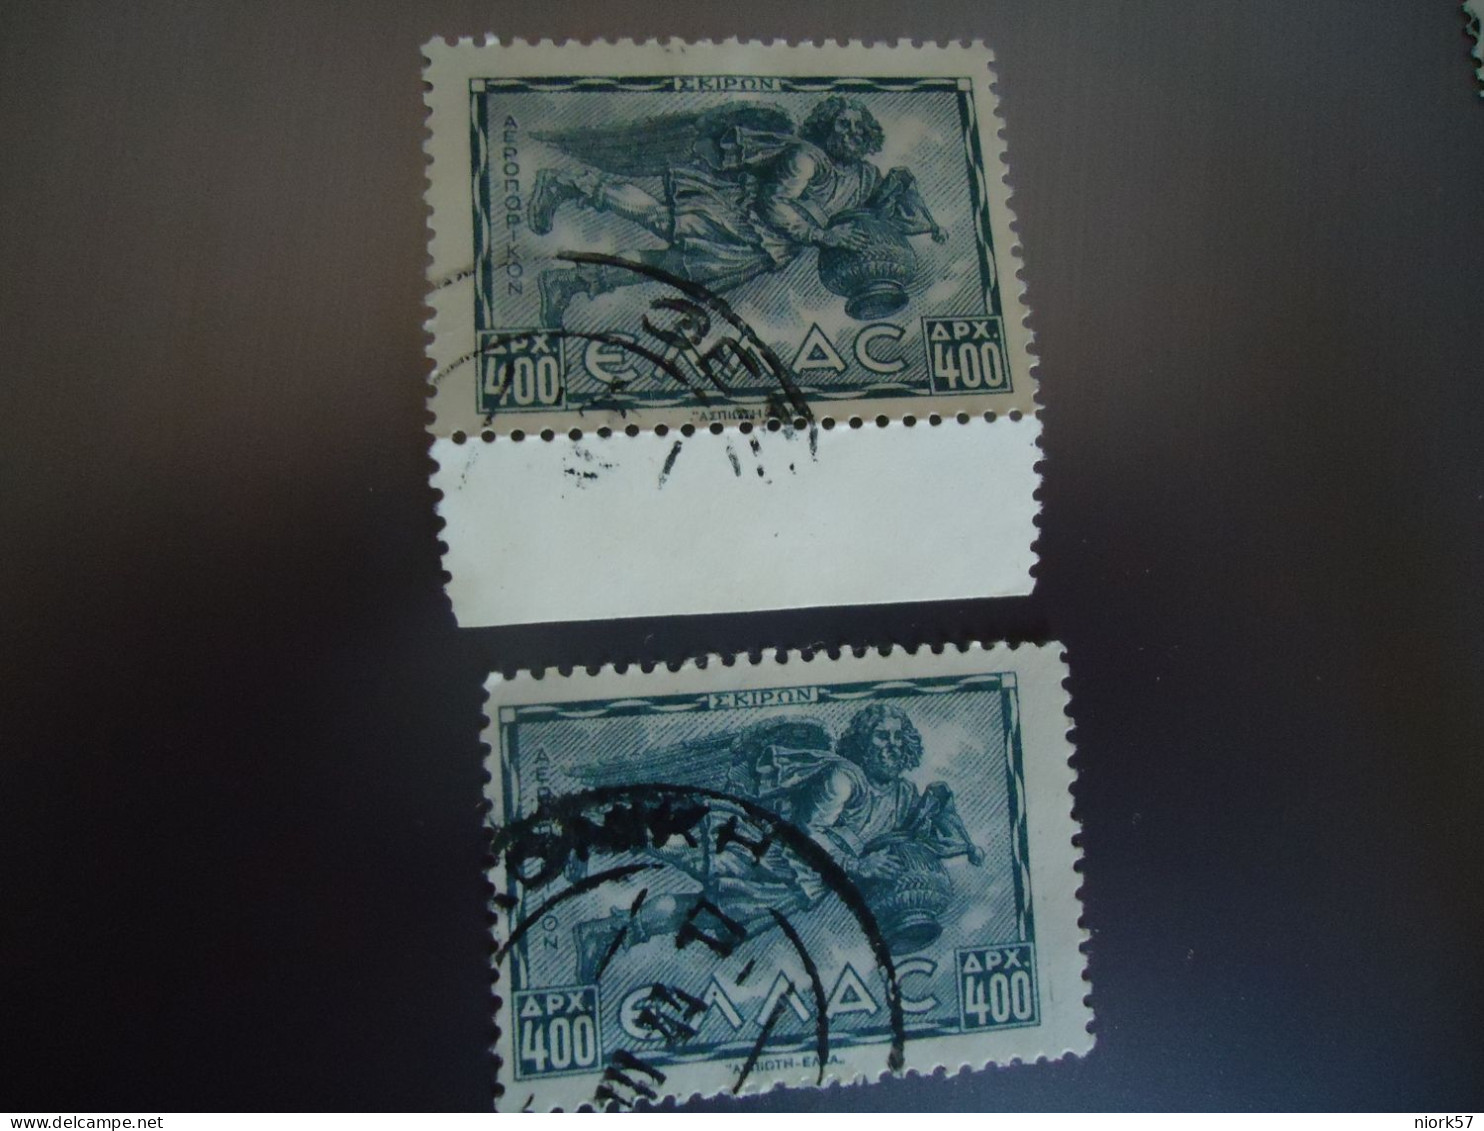 GREECE  USED  2  STAMPS  1943  AIR WINDS - Machine Labels [ATM]